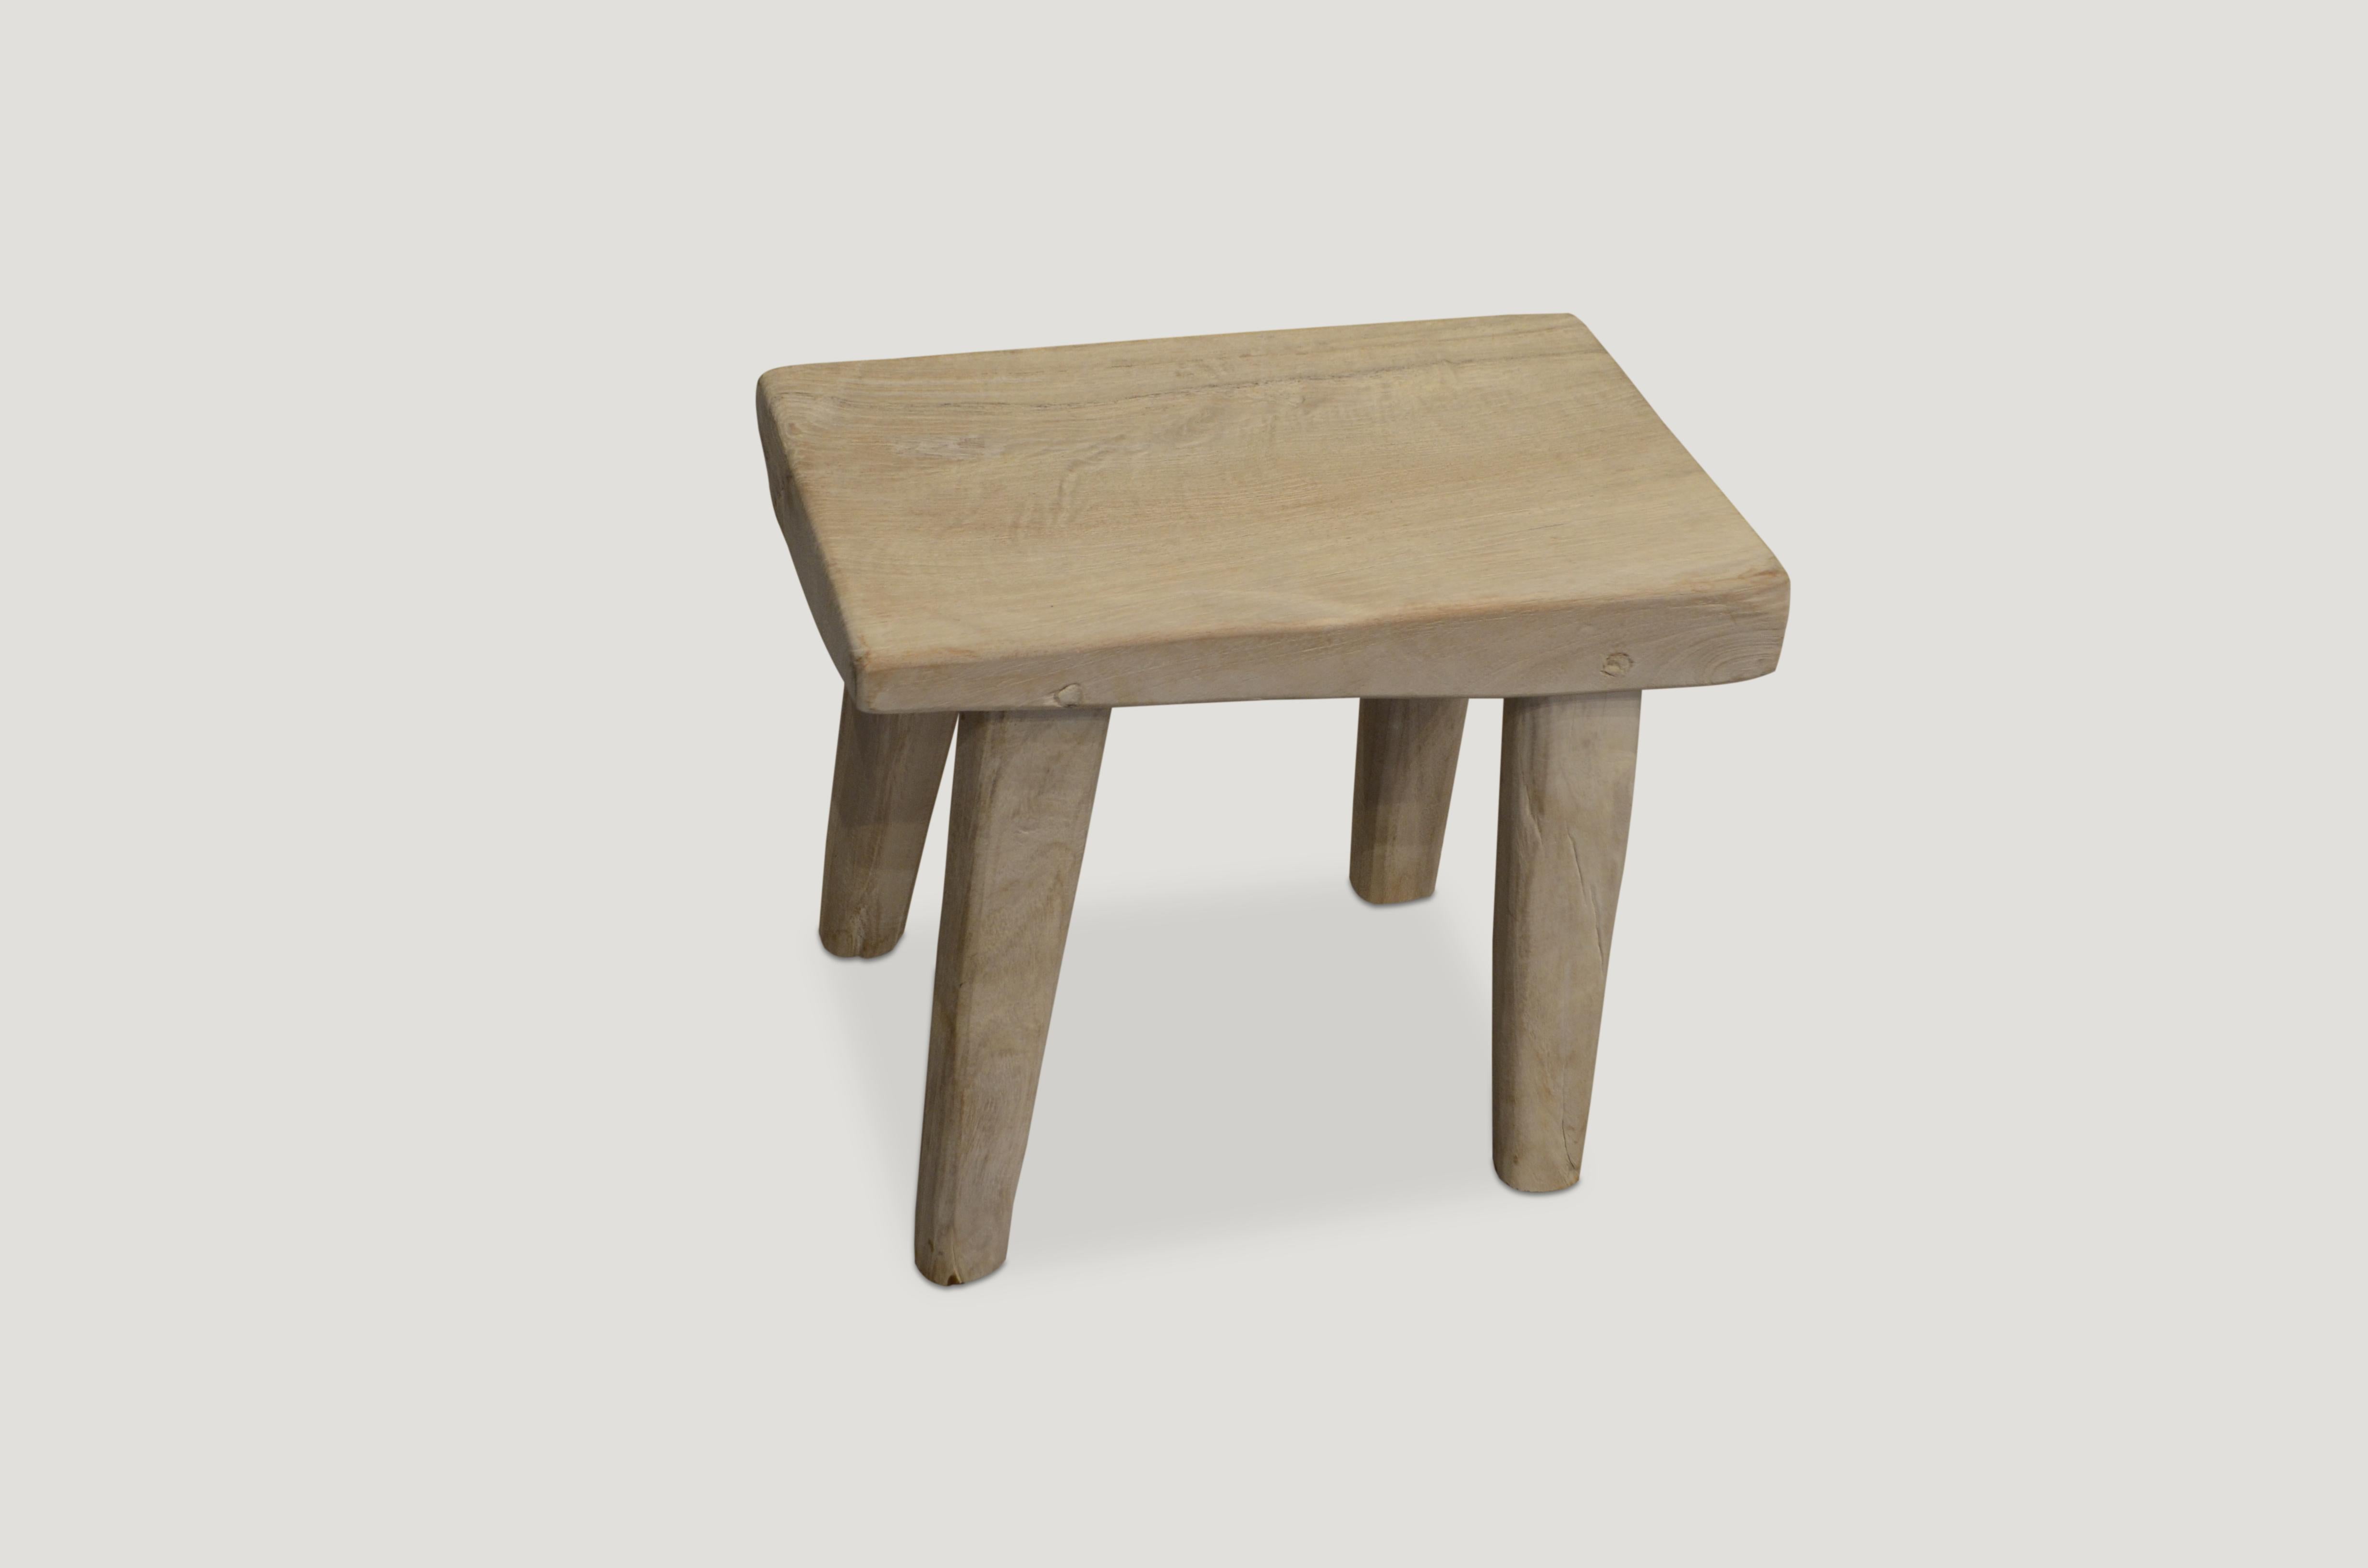 Reclaimed bleached teak wood stool or side table with a light white wash finish. Perfect for inside or outside living. We have a collection. The price reflects one.

The St. Barts collection features an exciting new line of organic white wash and